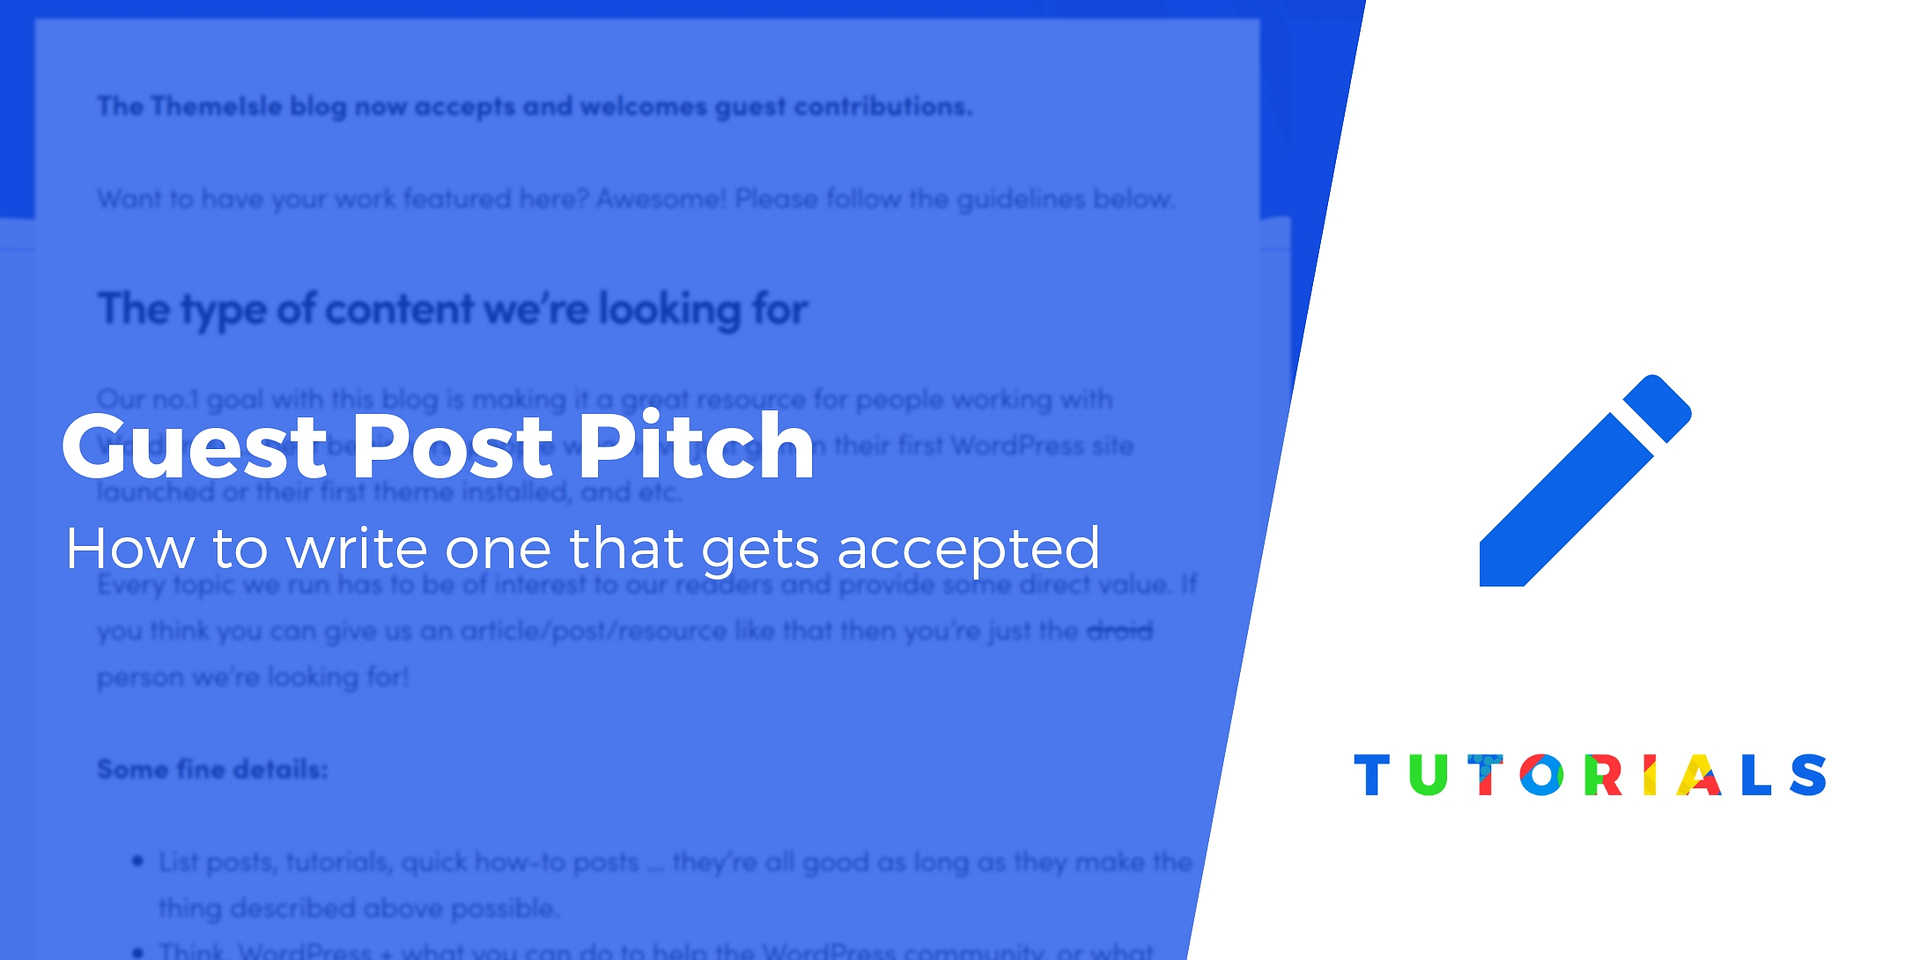 How to Write a Guest Post Pitch (Based on Real Experience)